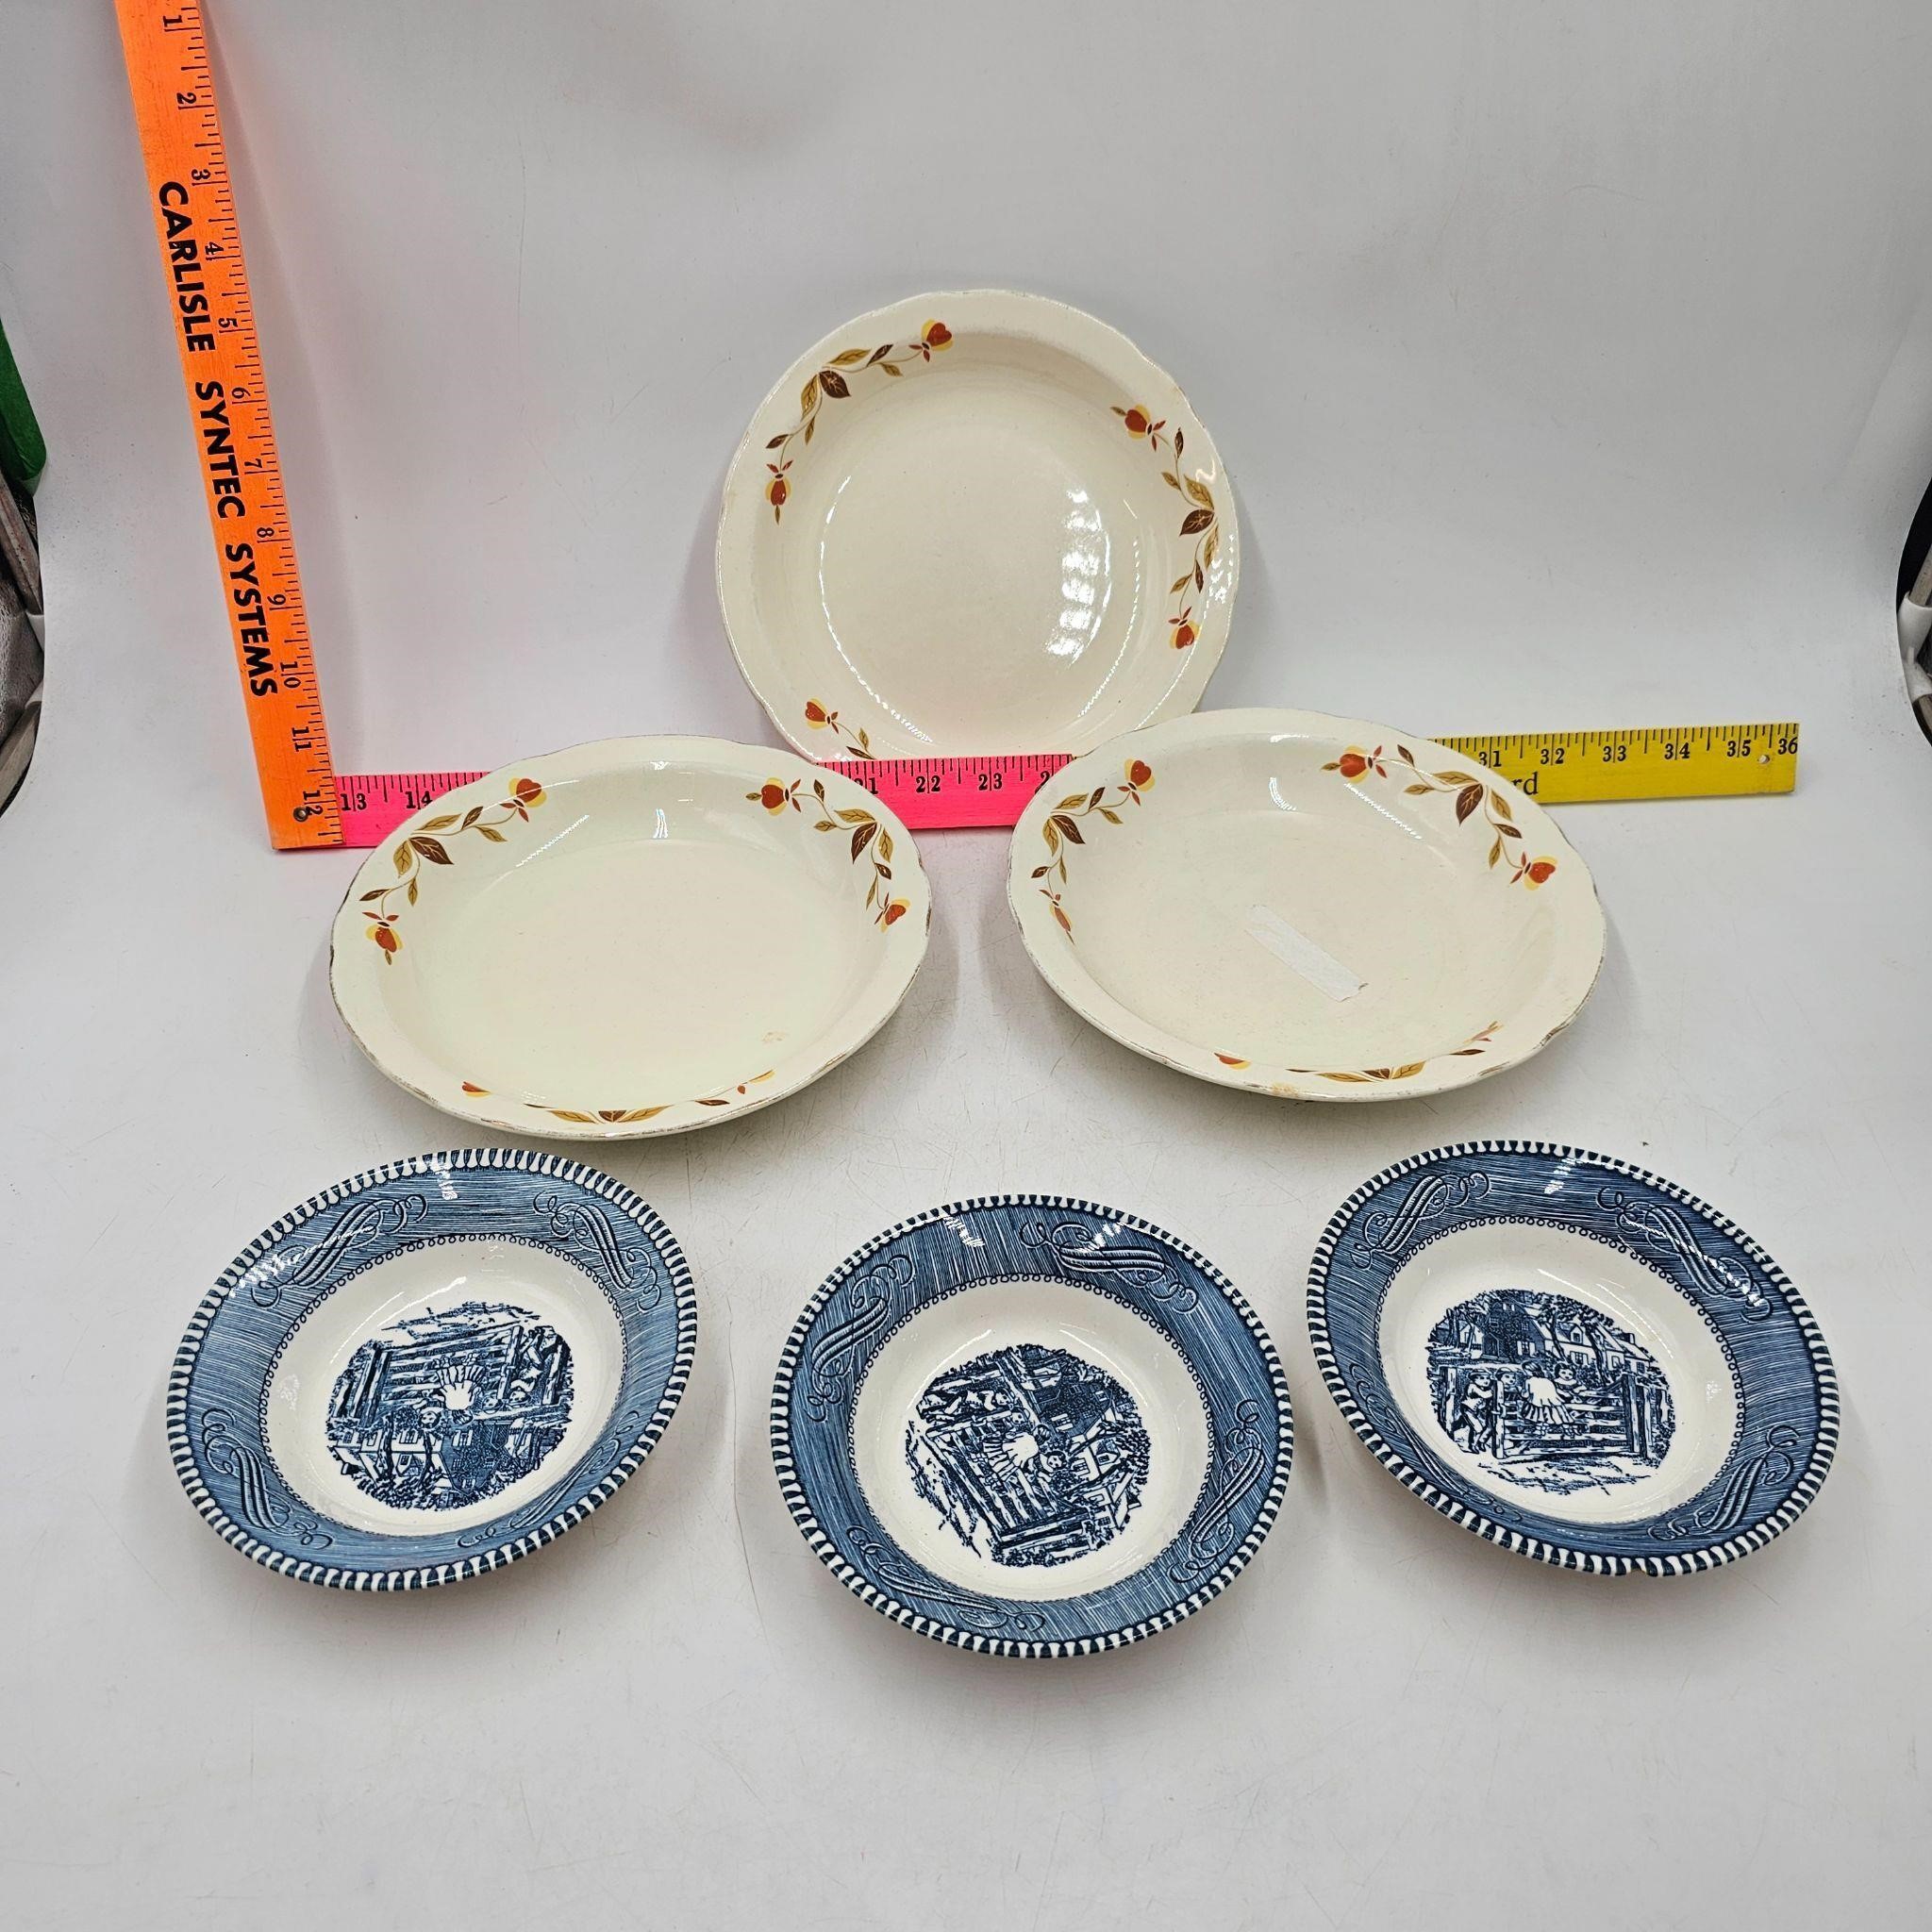 Currier and Ives Fruit Bowls (3)